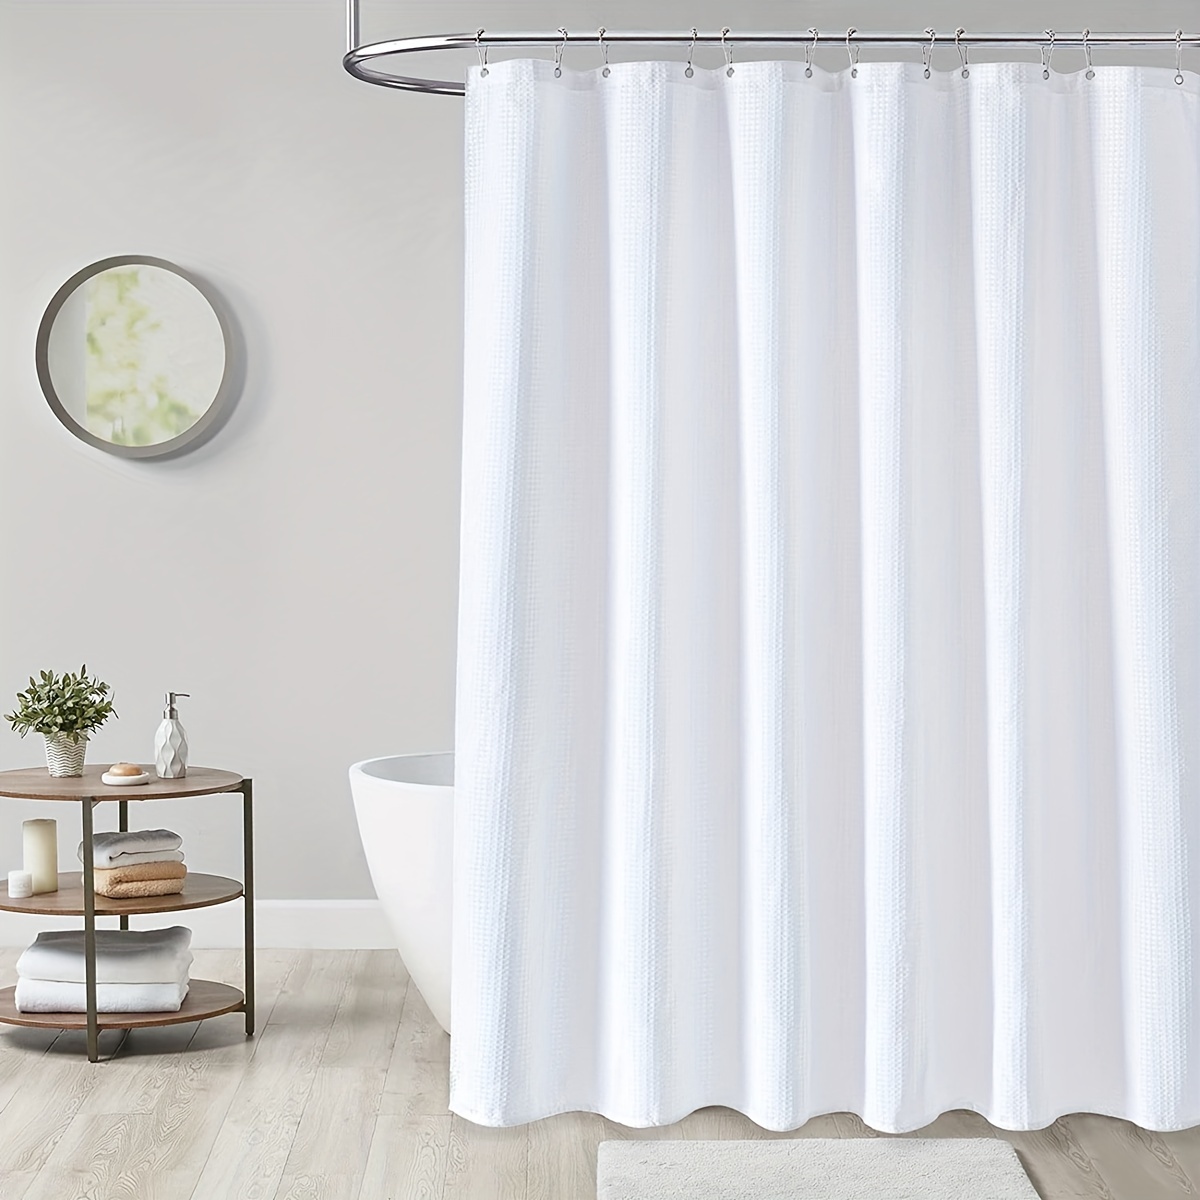 Shower Curtain with Snap-in Liner, Heavy Duty Waterproof Metal